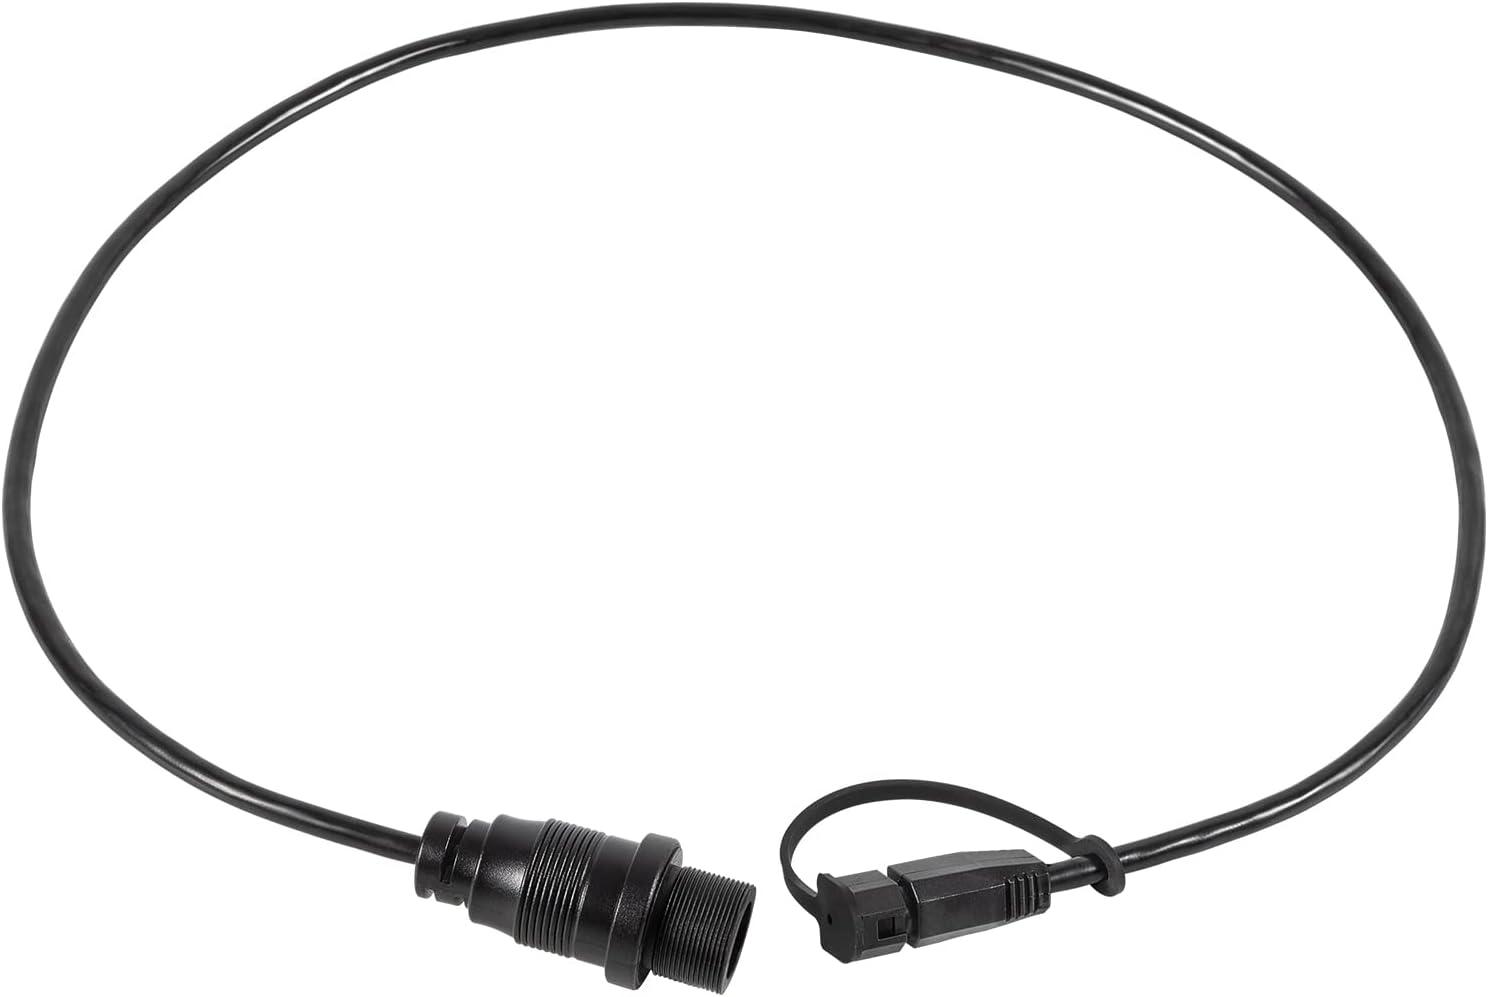 MKR-MDI-2 Sonar Adapter Cable for Hummingbird HELIX 7 G3 or G3N G4 G4N  1852086